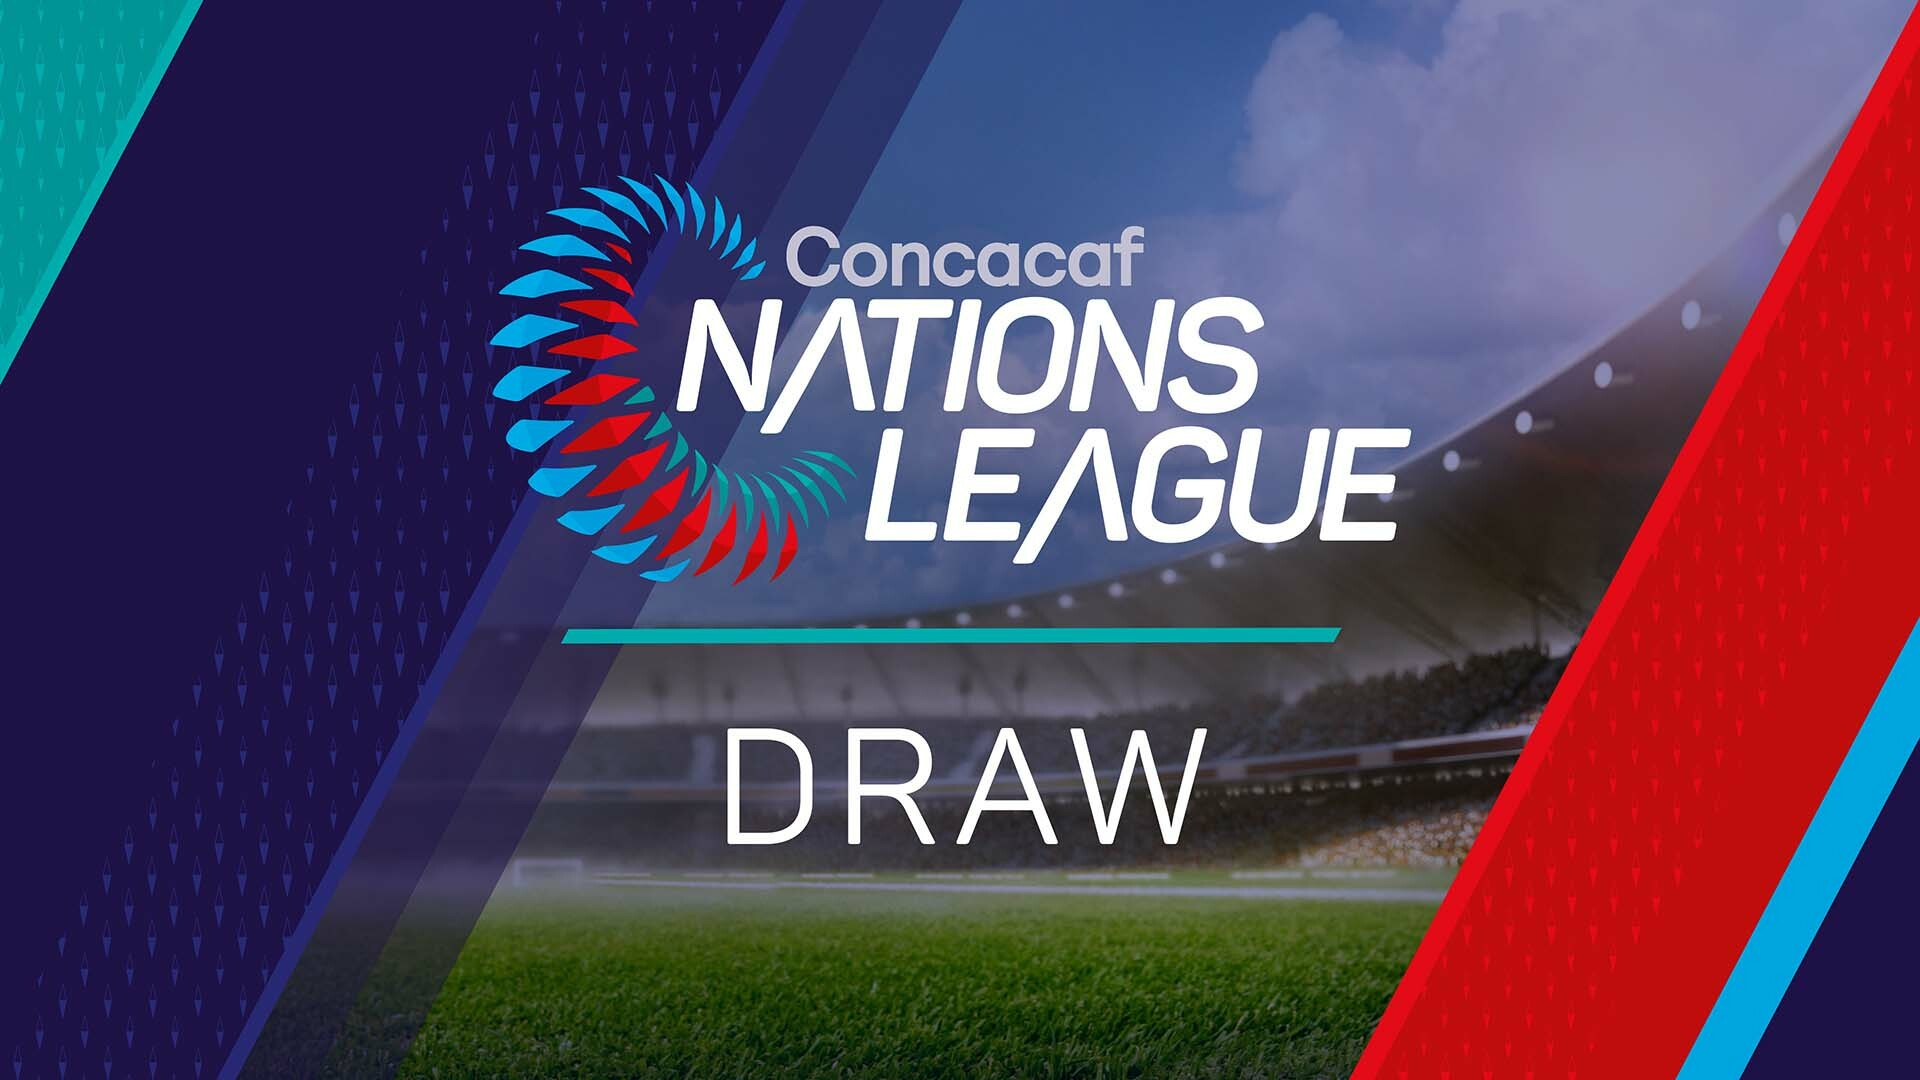 Concacaf nations league